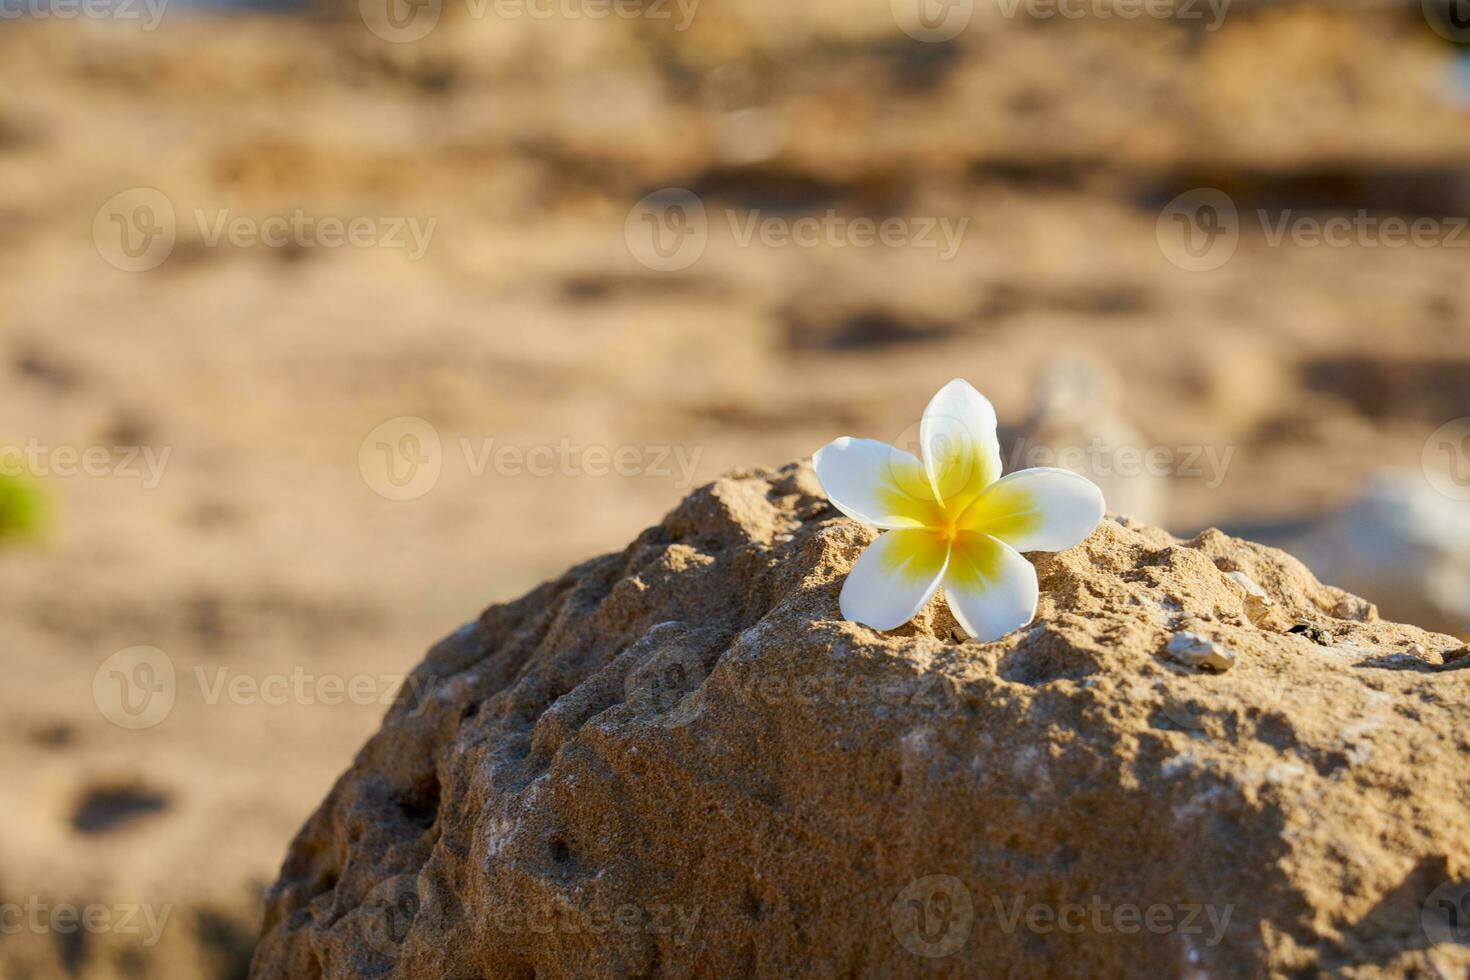 Plumeria flower on a stone with a blurred background. photo